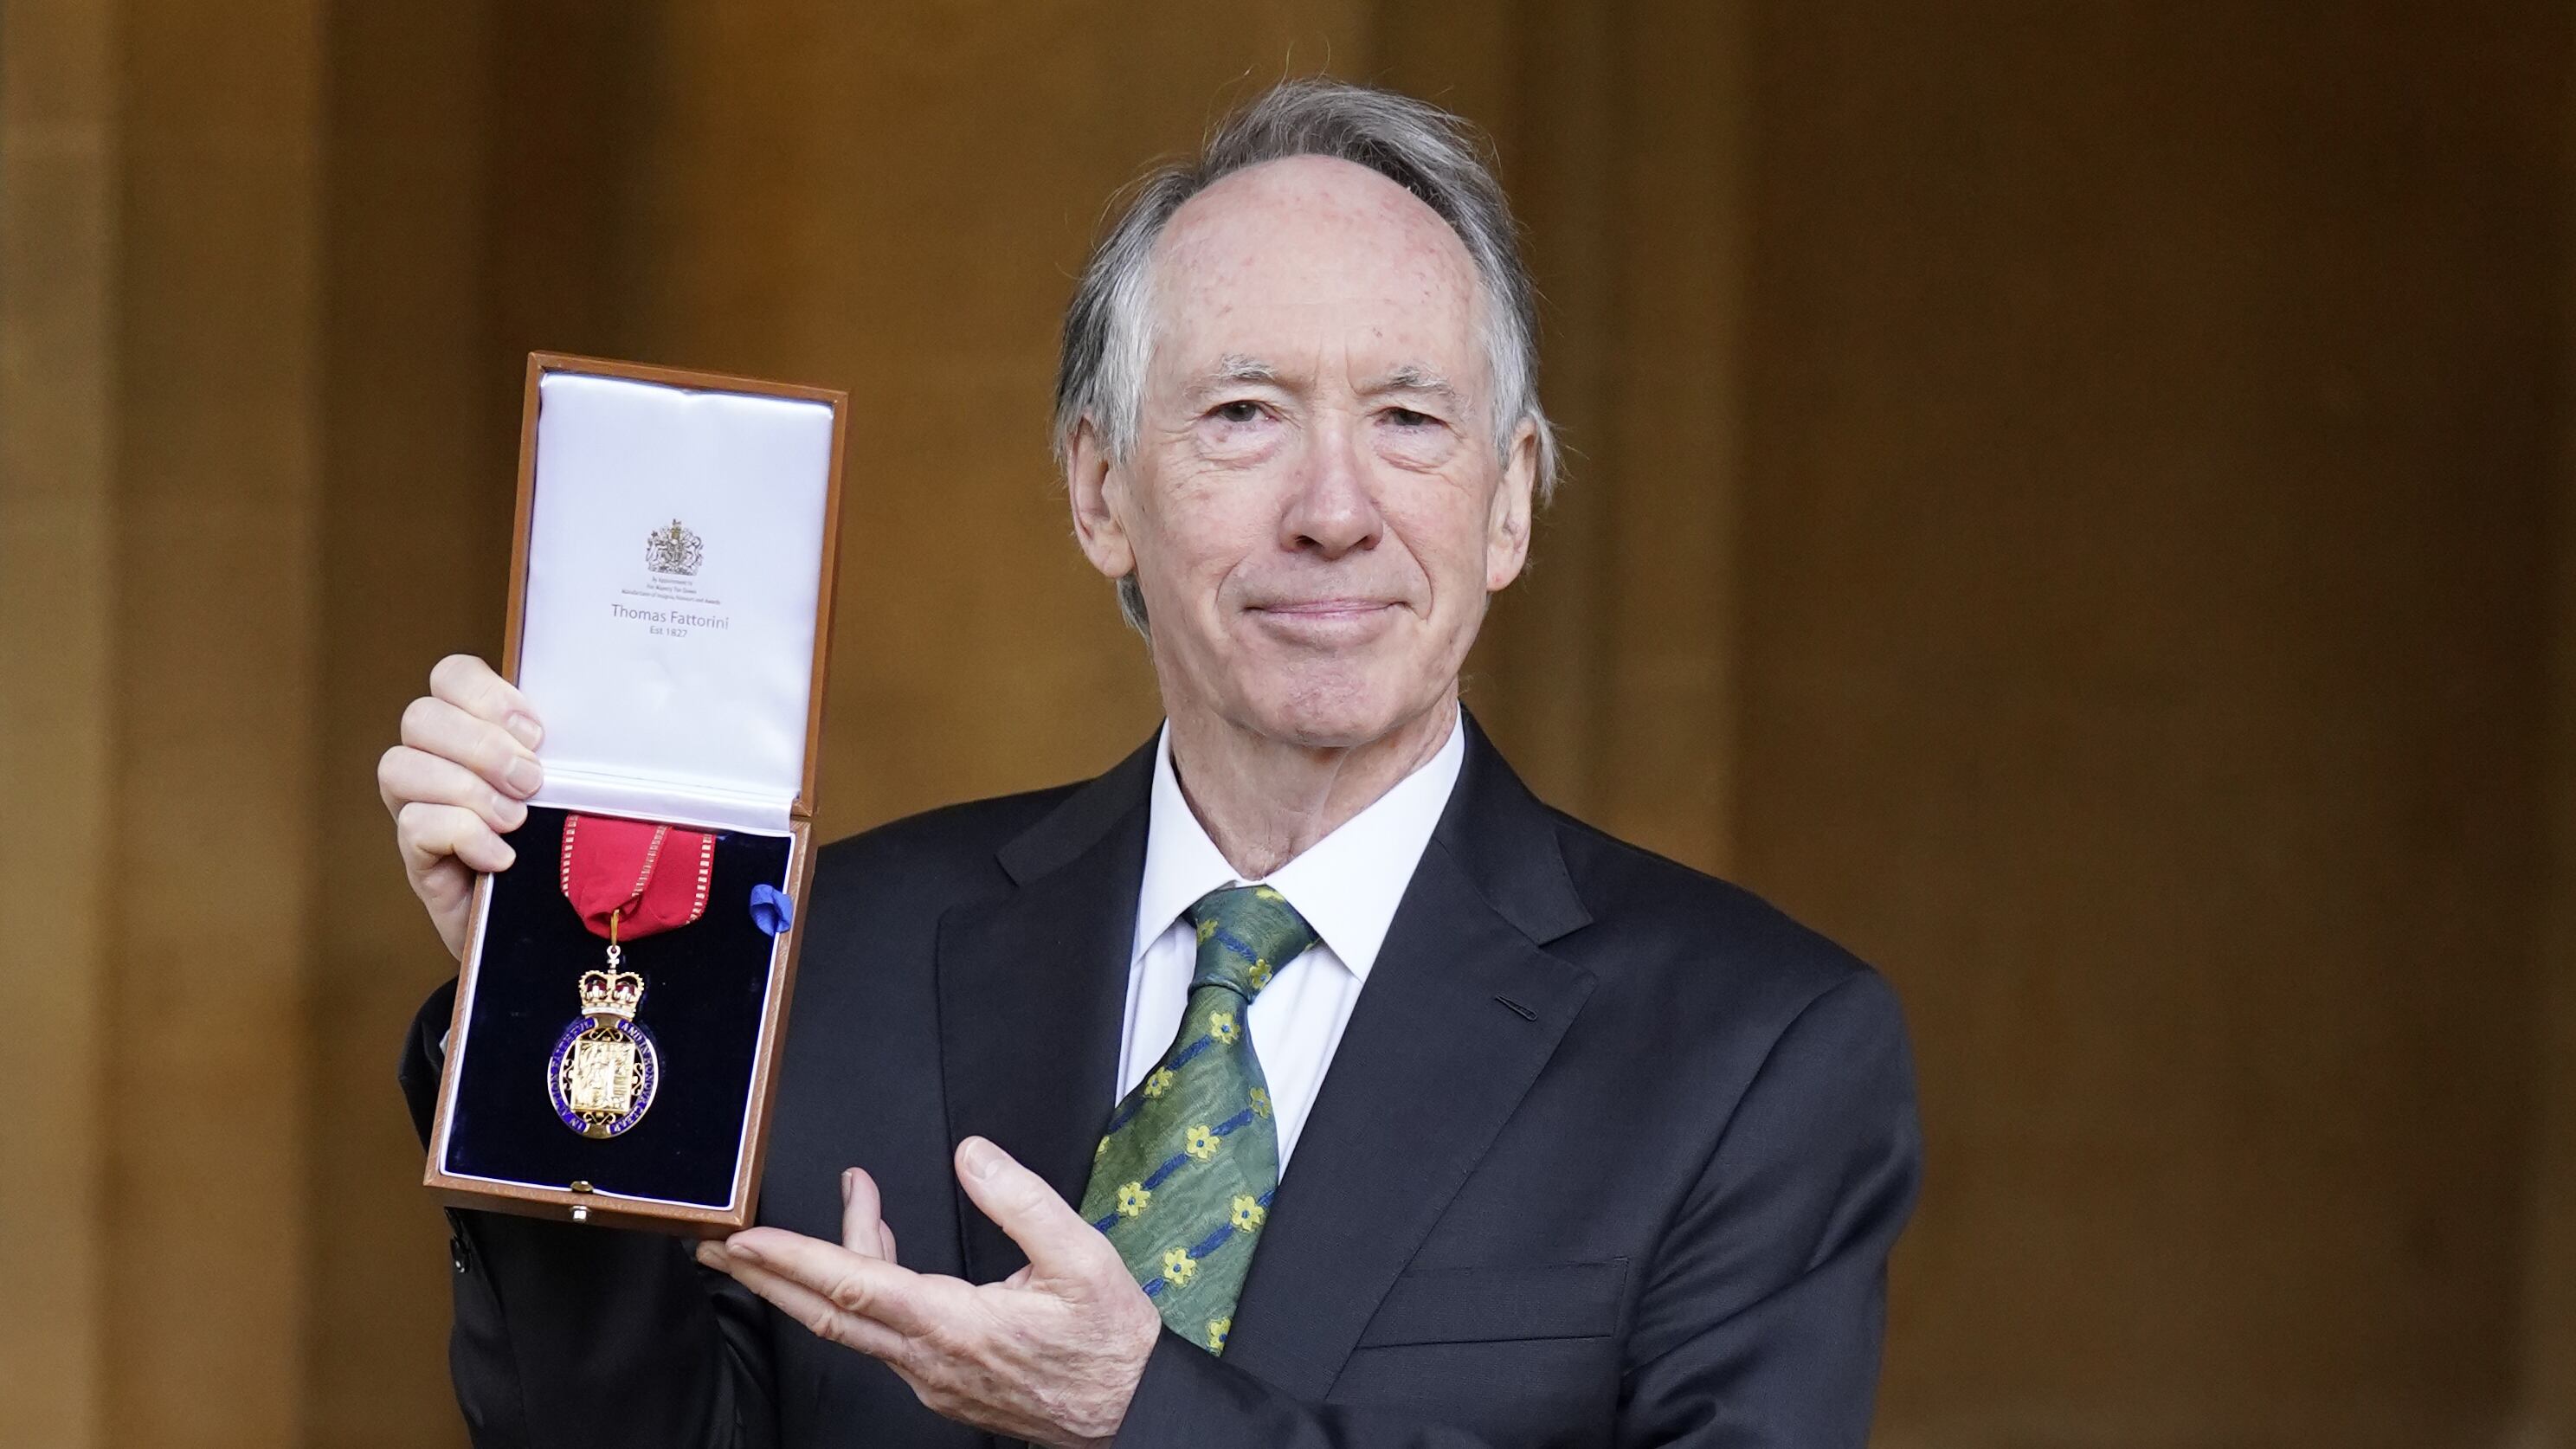 Author Ian McEwan after being made a Companion of Honour during an investiture ceremony at Windsor Castle